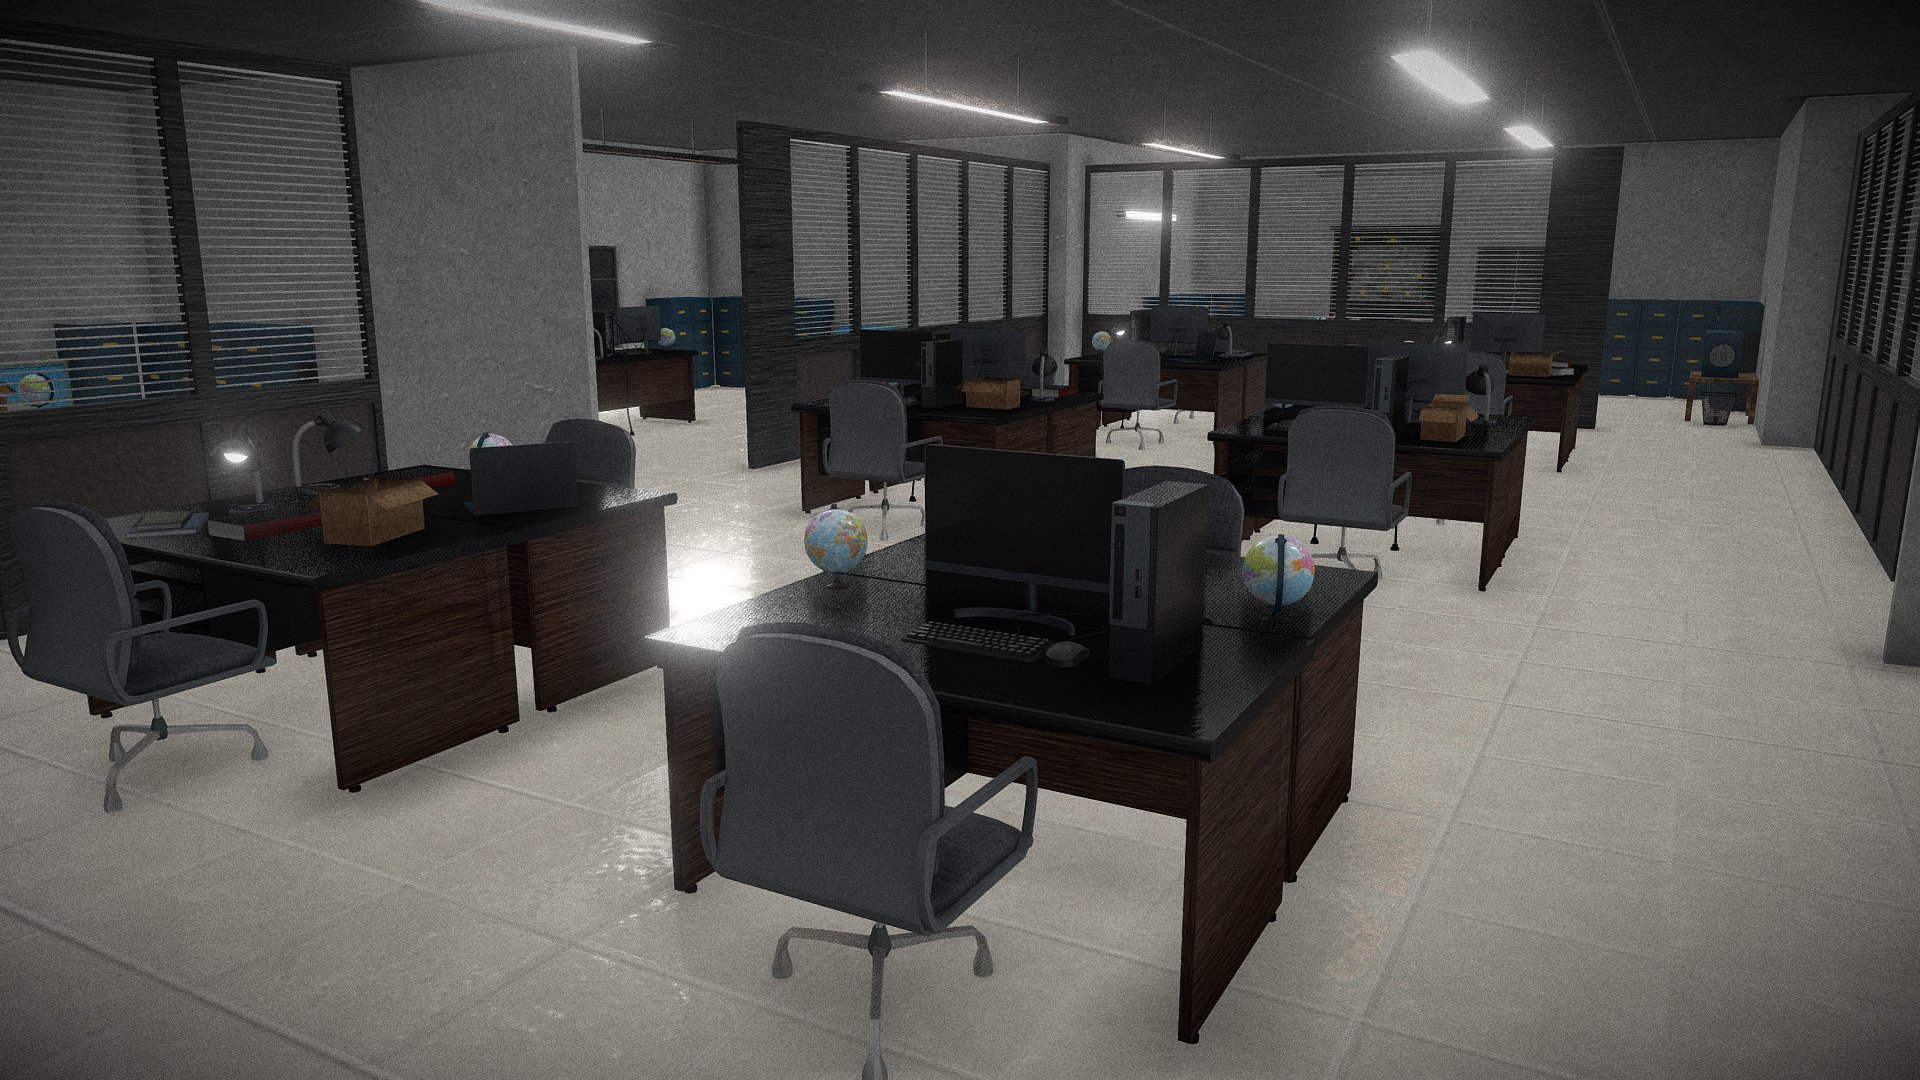 Original concept from Cuanki Production for Police Station Interior Office. Low Poly 3D model ready for Video Games, Augmented Reality and Virtual Reality with PBR Texture 2K Resolution.

3D model include: Computer, Board, Cupboard, books, television, laptop, table, chair, globe, box. Model with Blender 3.2.2

Hope you like this 3d model

Thank you - Police Station Interior Office - Buy Royalty Free 3D model by cuankiproduction 3d model